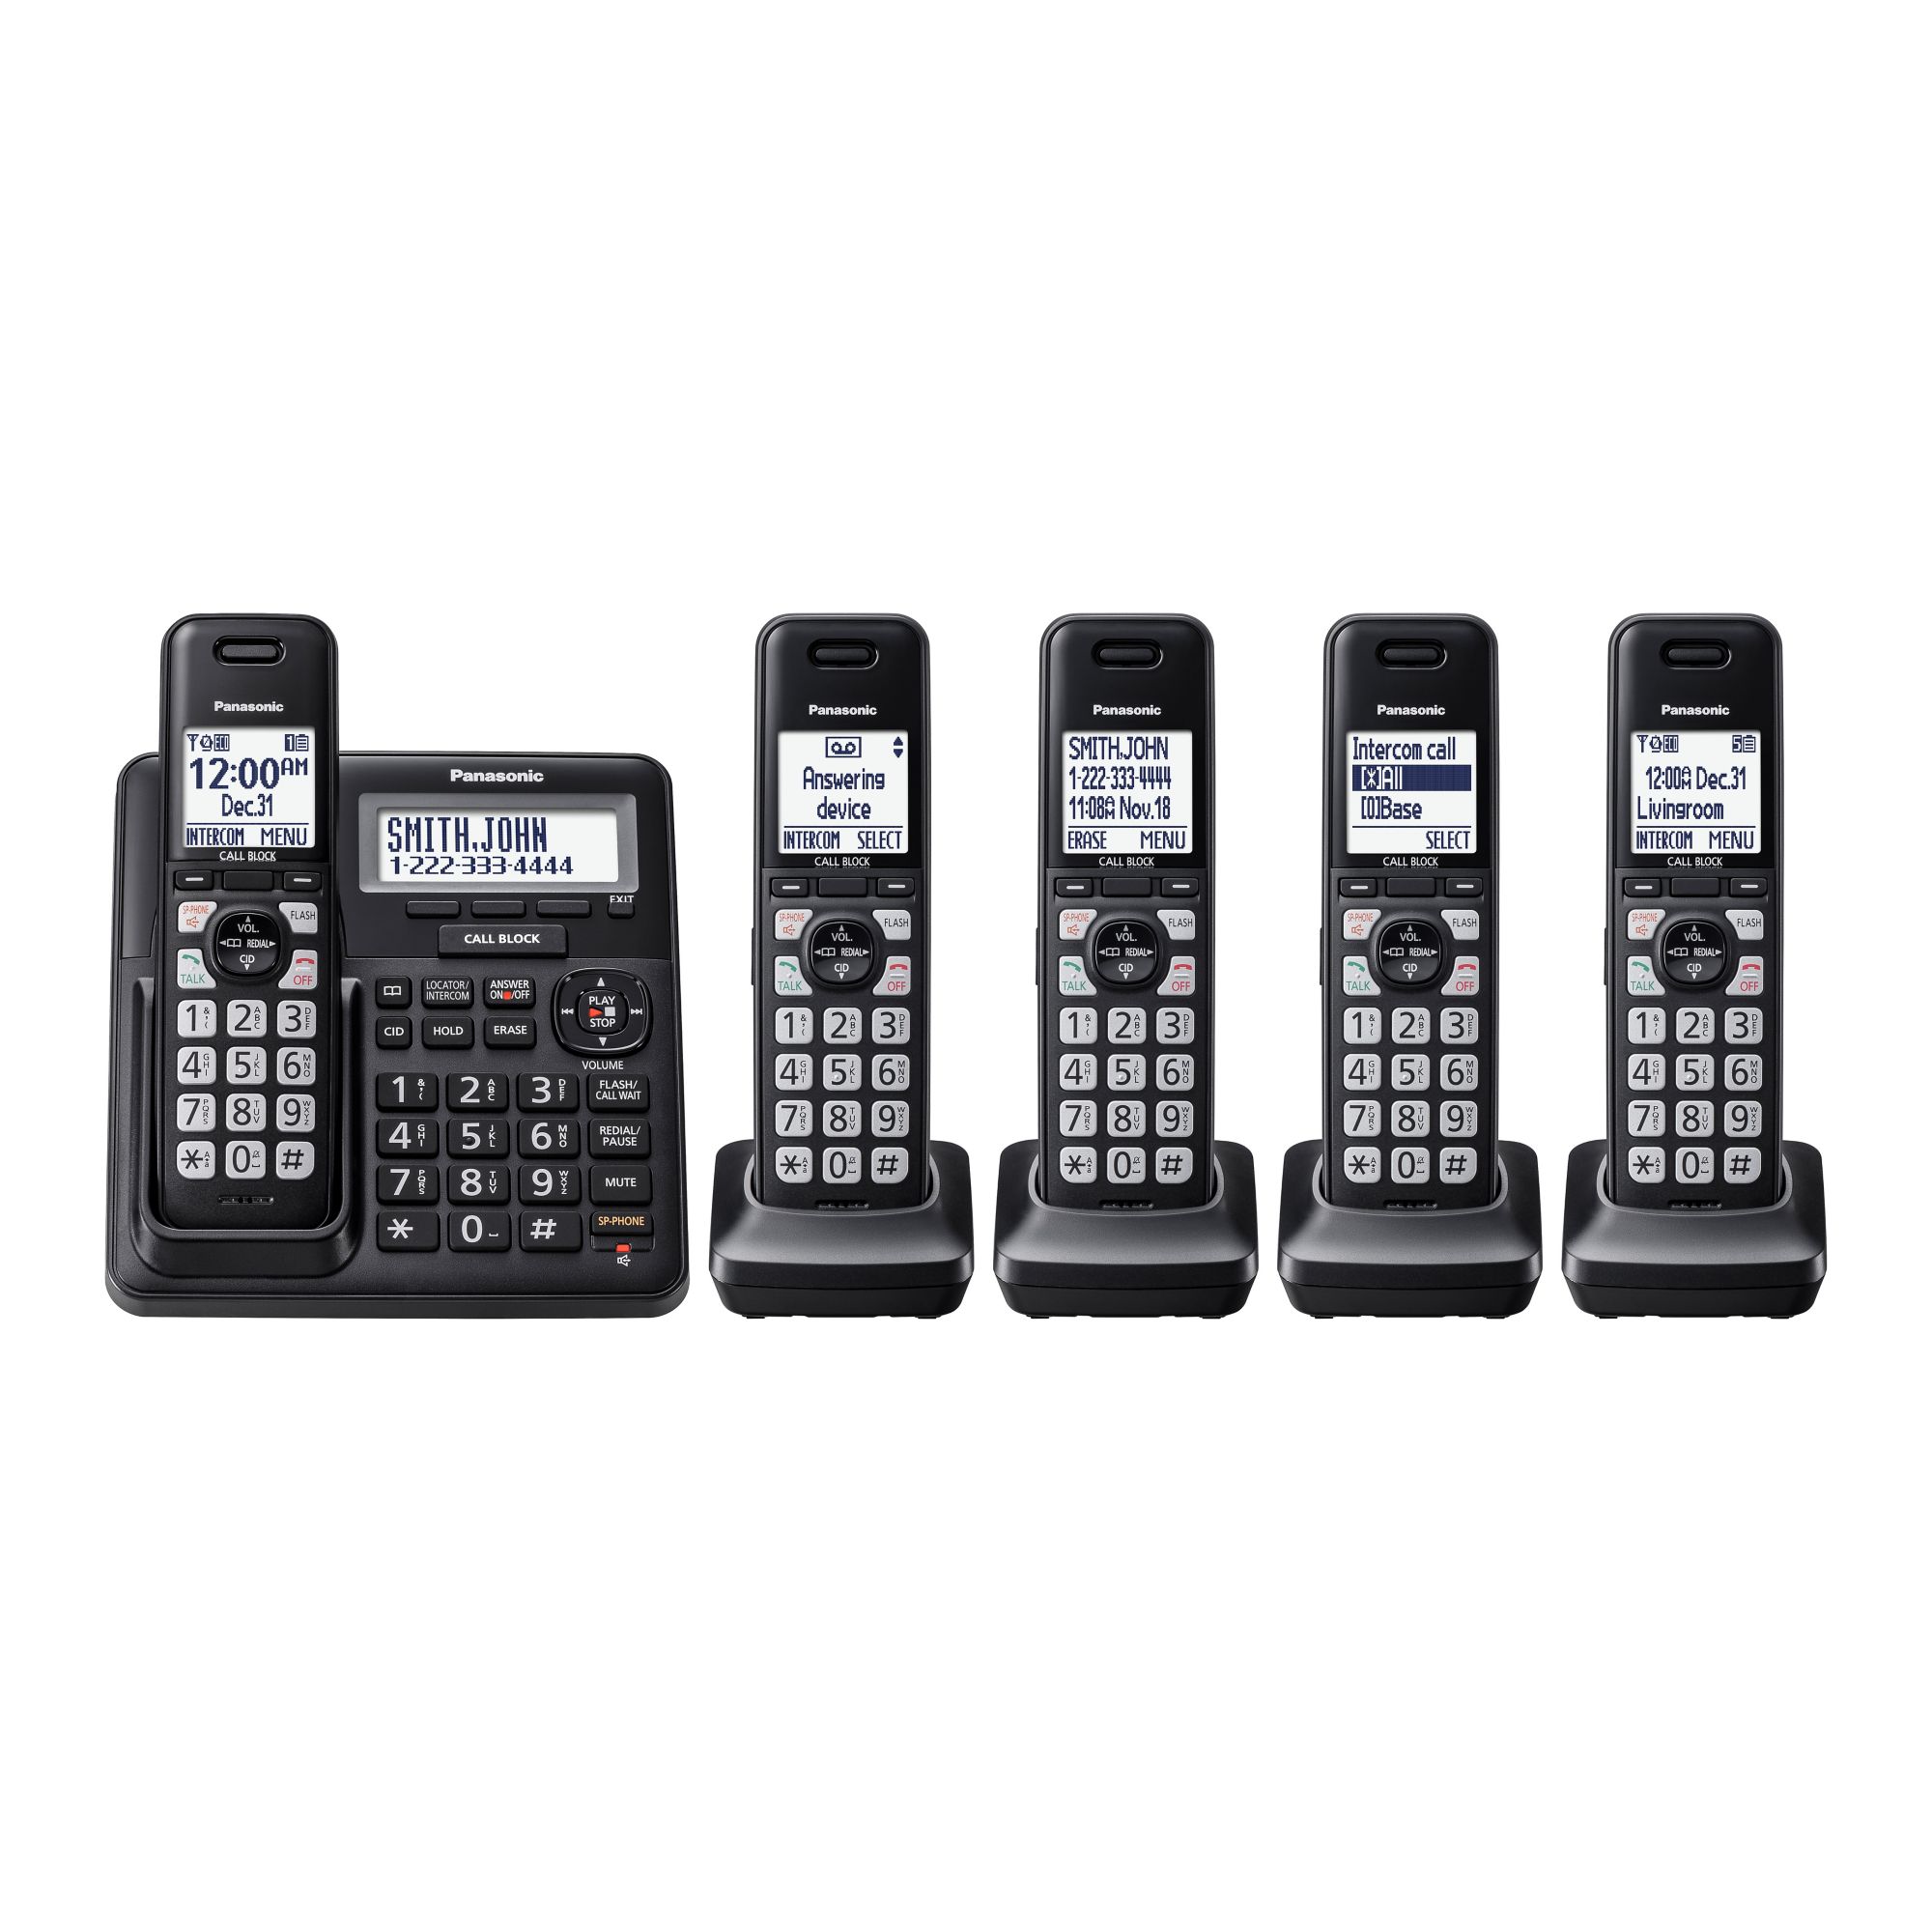 Panasonic DECT 6.0 5-Handset Cordless Phone with Talking Caller ID,  Advanced Call Block System and Answering System